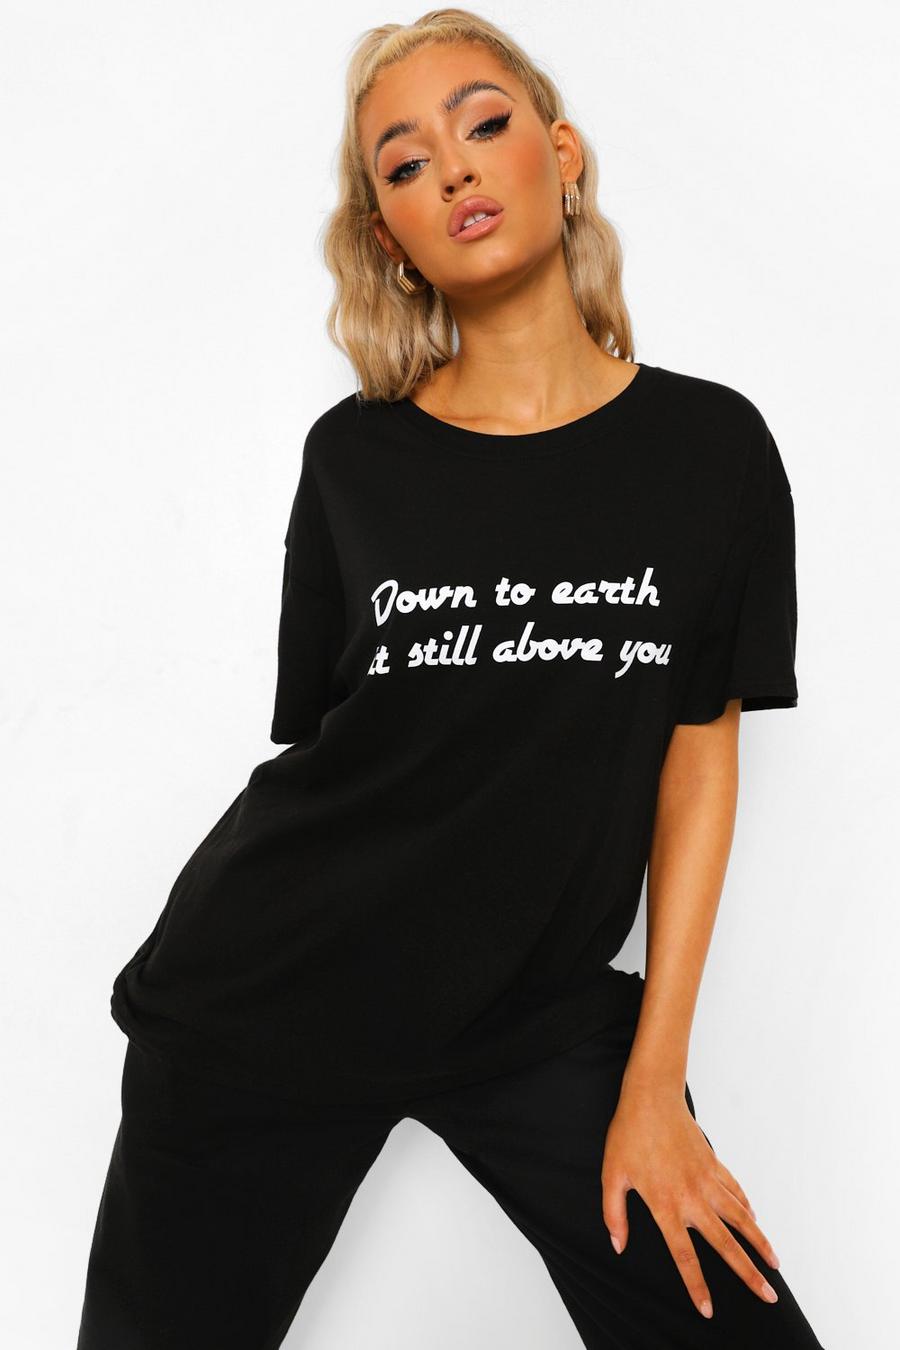 Black Tall Above You Slogan T-shirt image number 1